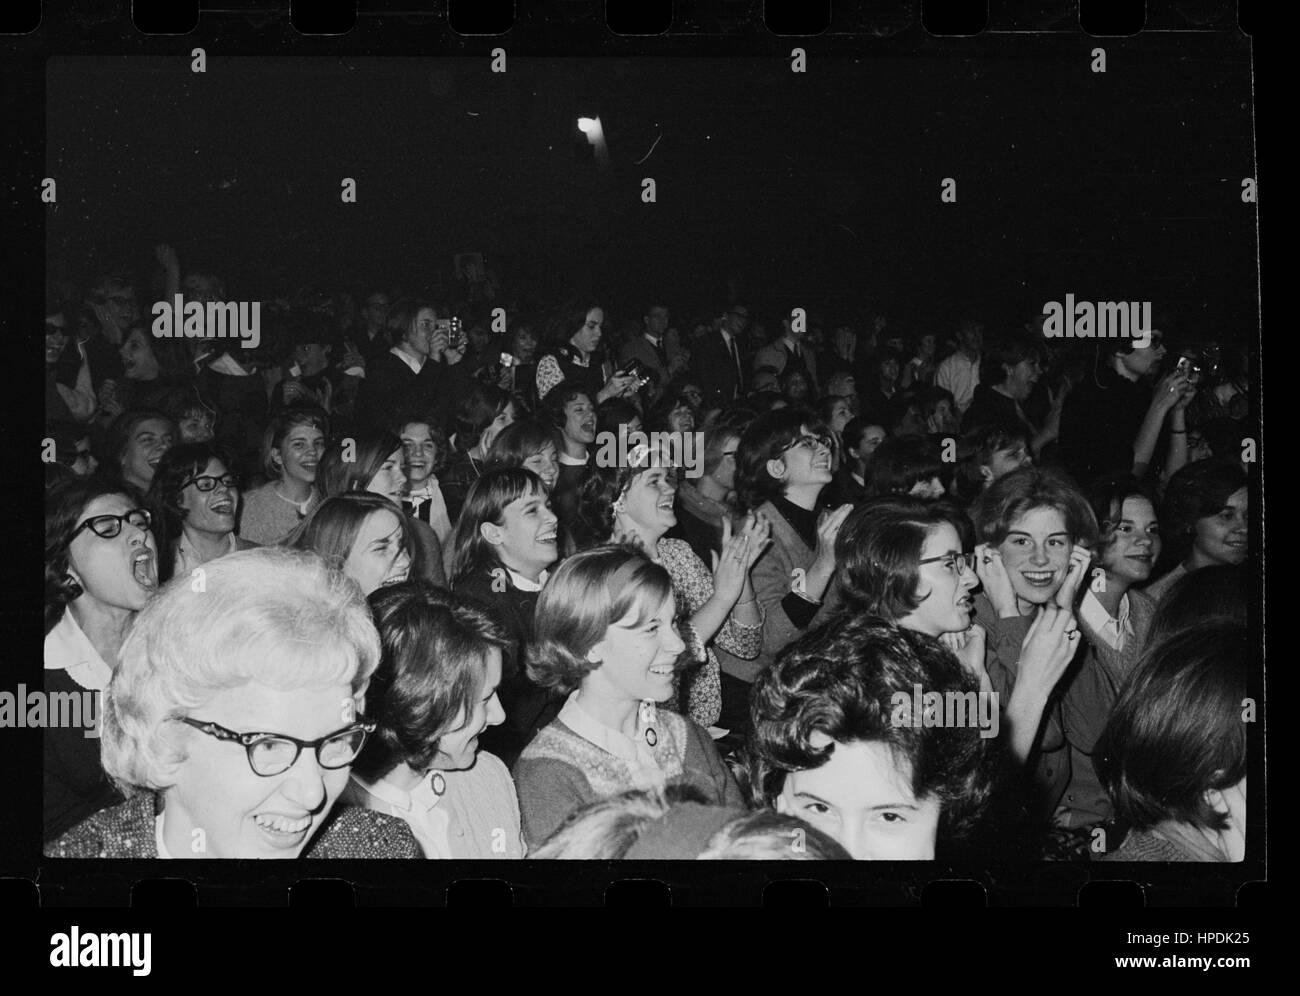 The Beatles performing for an excited and happy crowd, Washington, DC, 02/11/1964. Photo by Marion S Trikosko Stock Photo